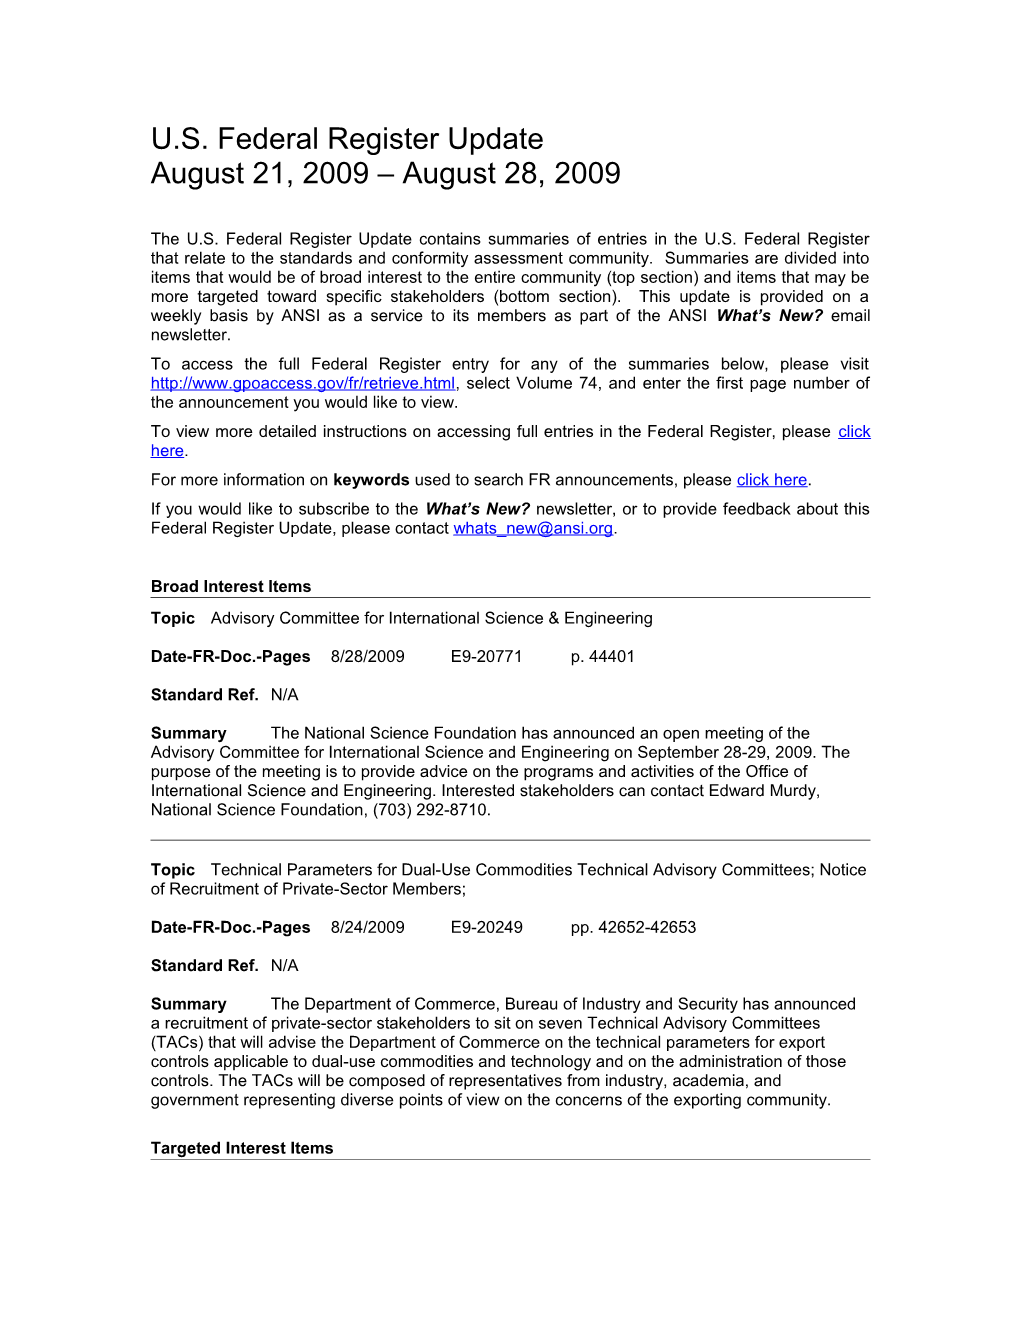 Standards and Trade Related Notices from the U.S. Federal Register, 8.28.09